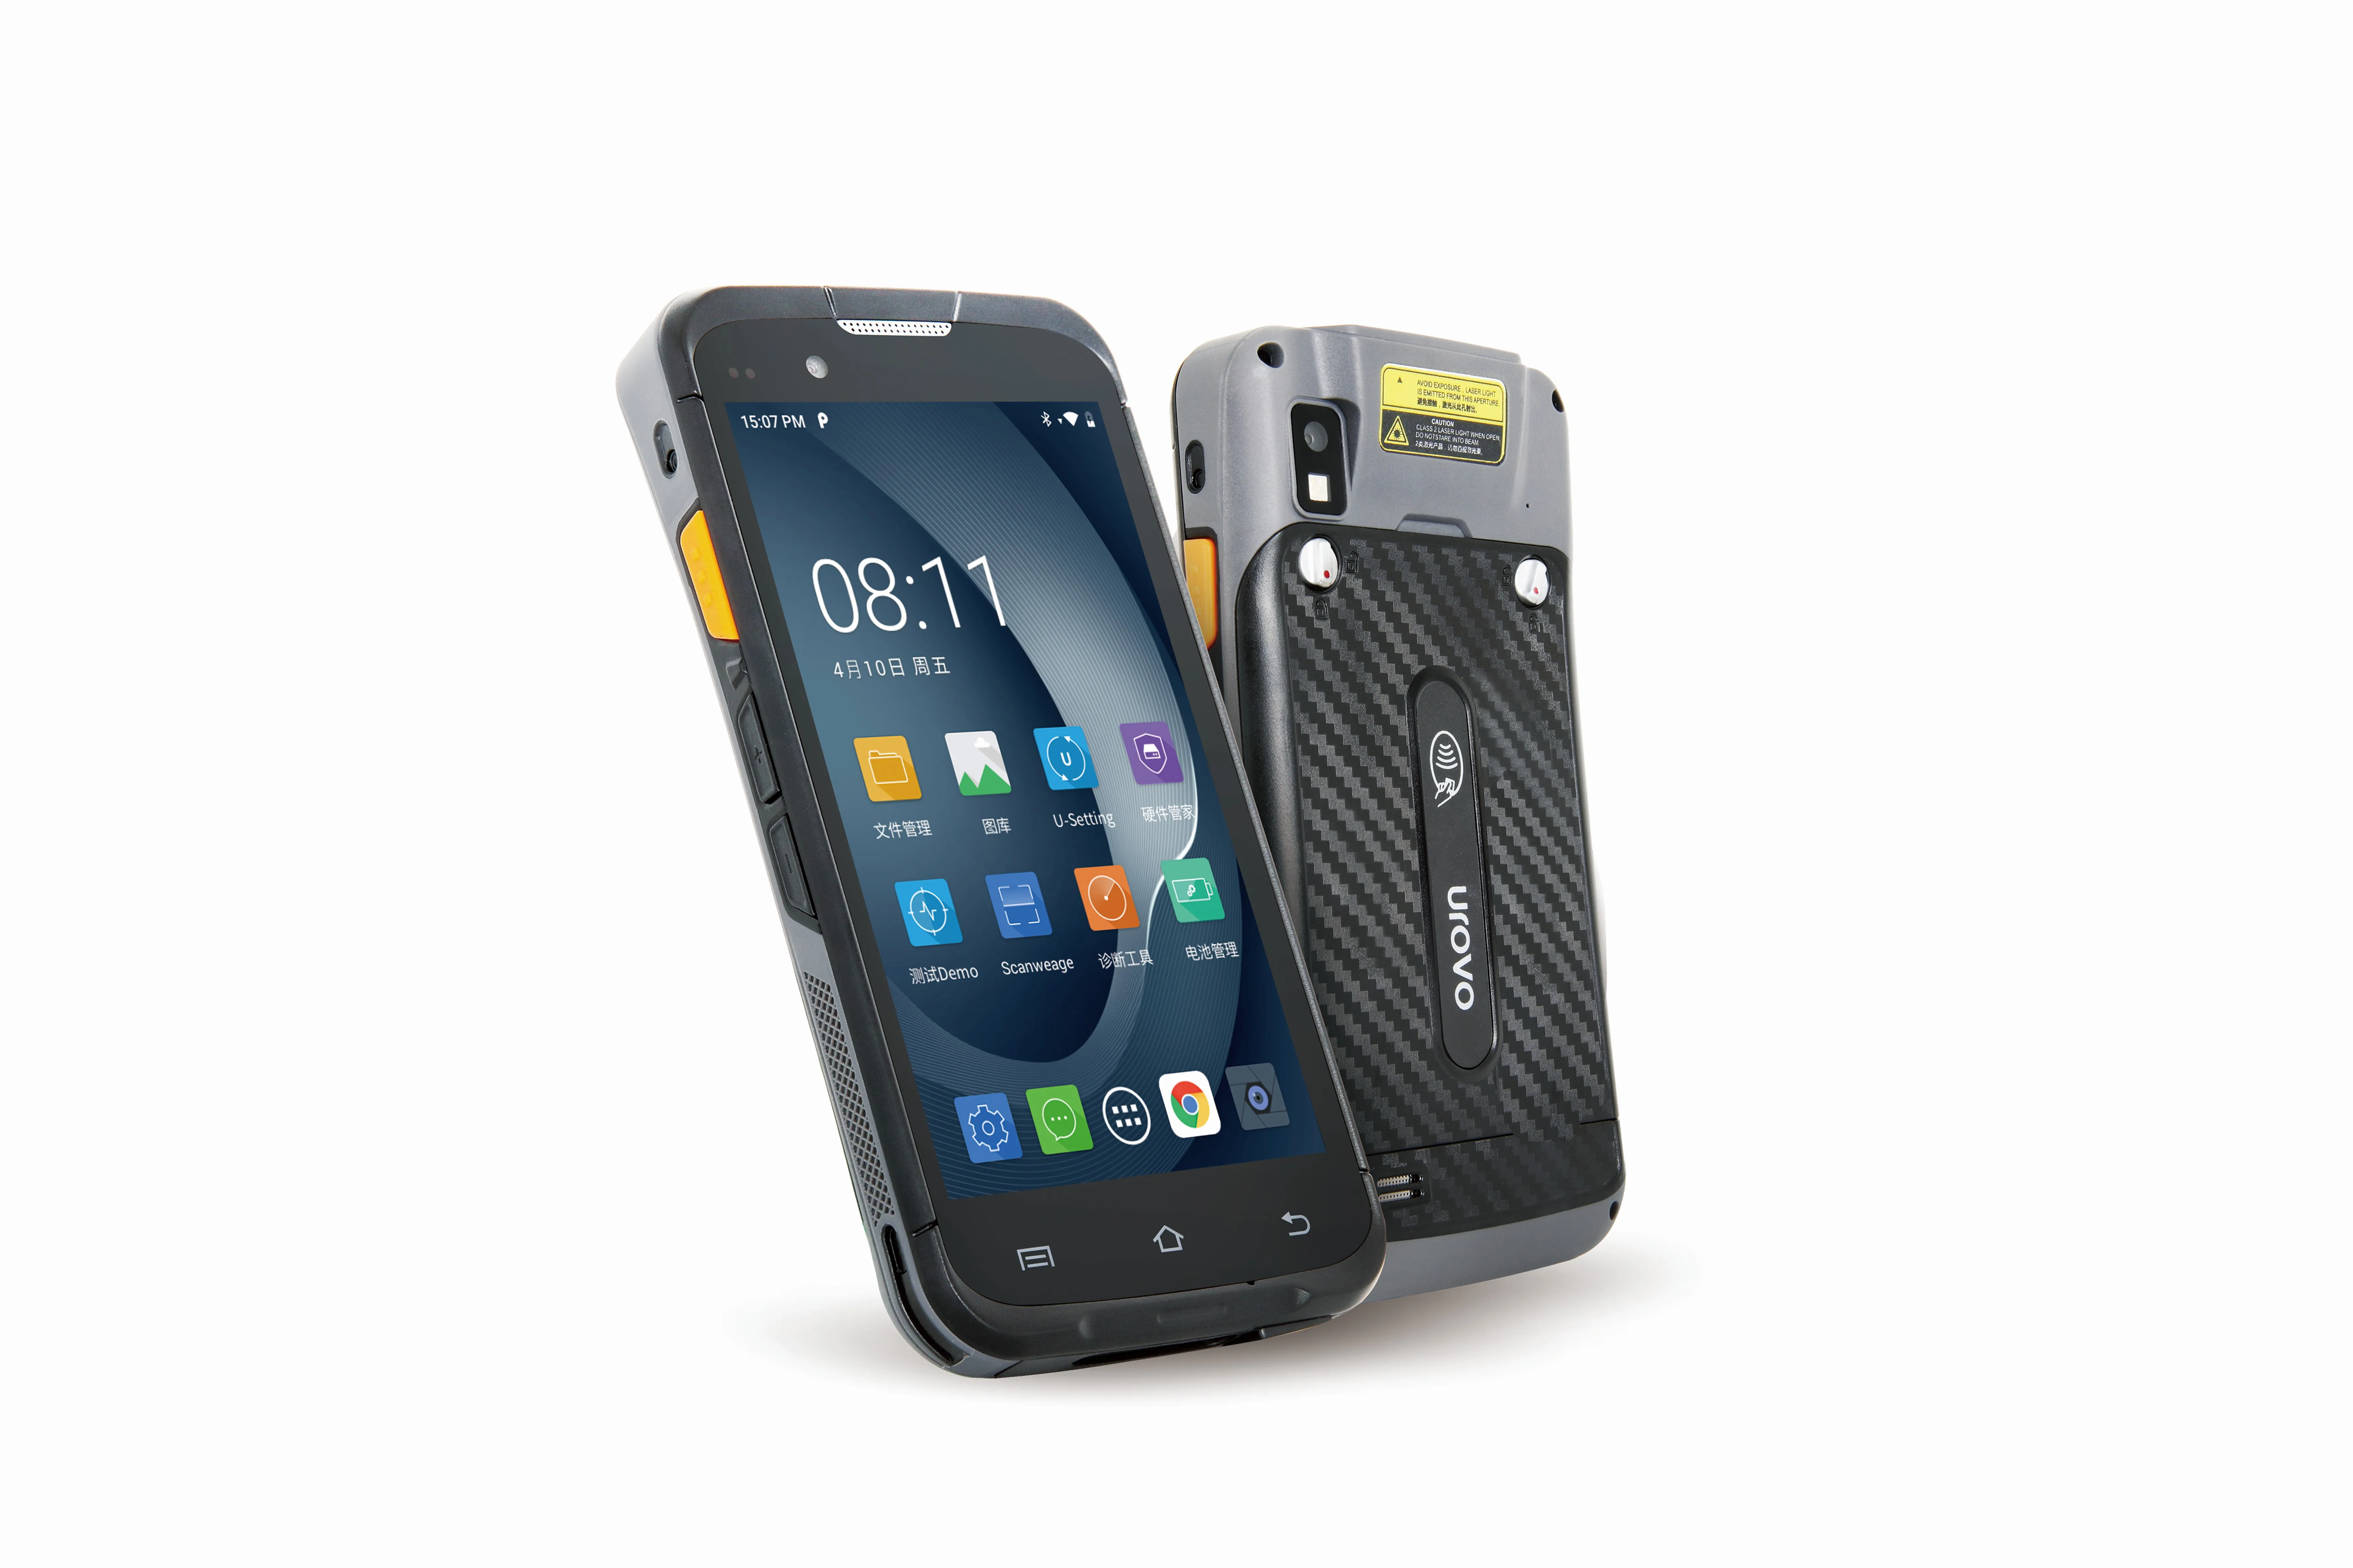 Urovo i6300 Handheld mobile computer rugged data terminal Android 7.1 with 1D/2D barcode scanner